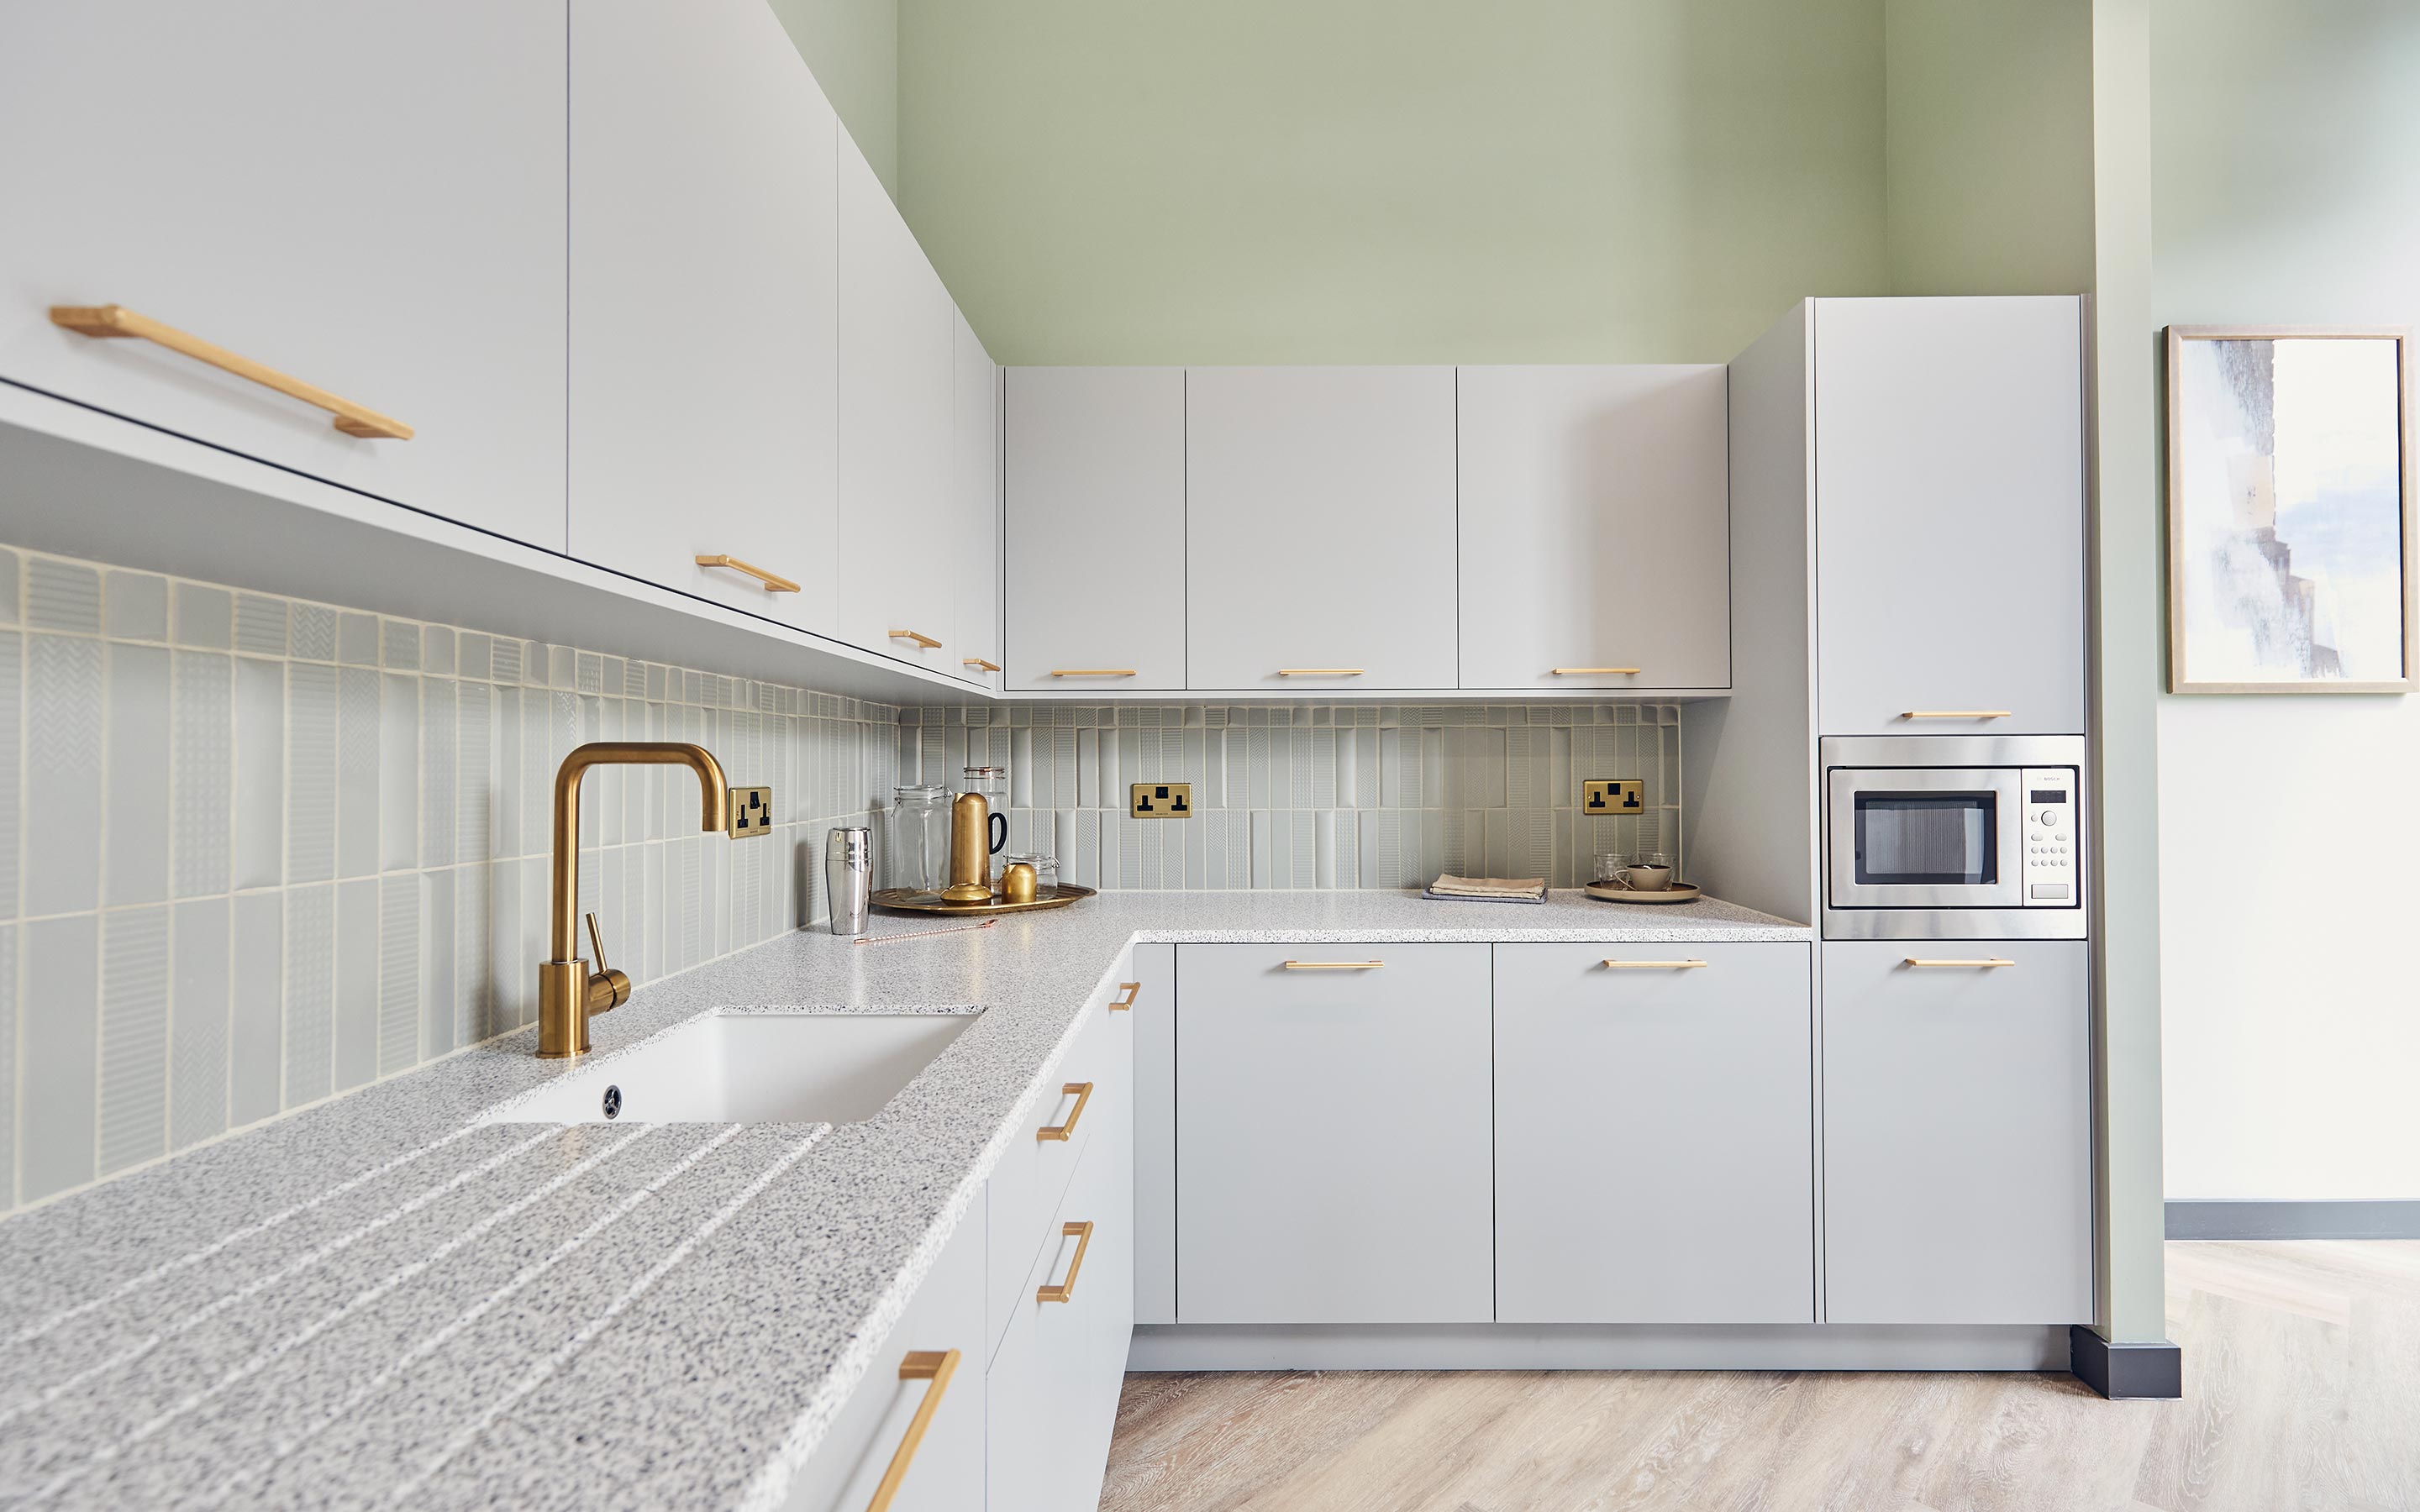 The image shows a kitchen with pale blue cabinets, gold fixings, and serene artwork